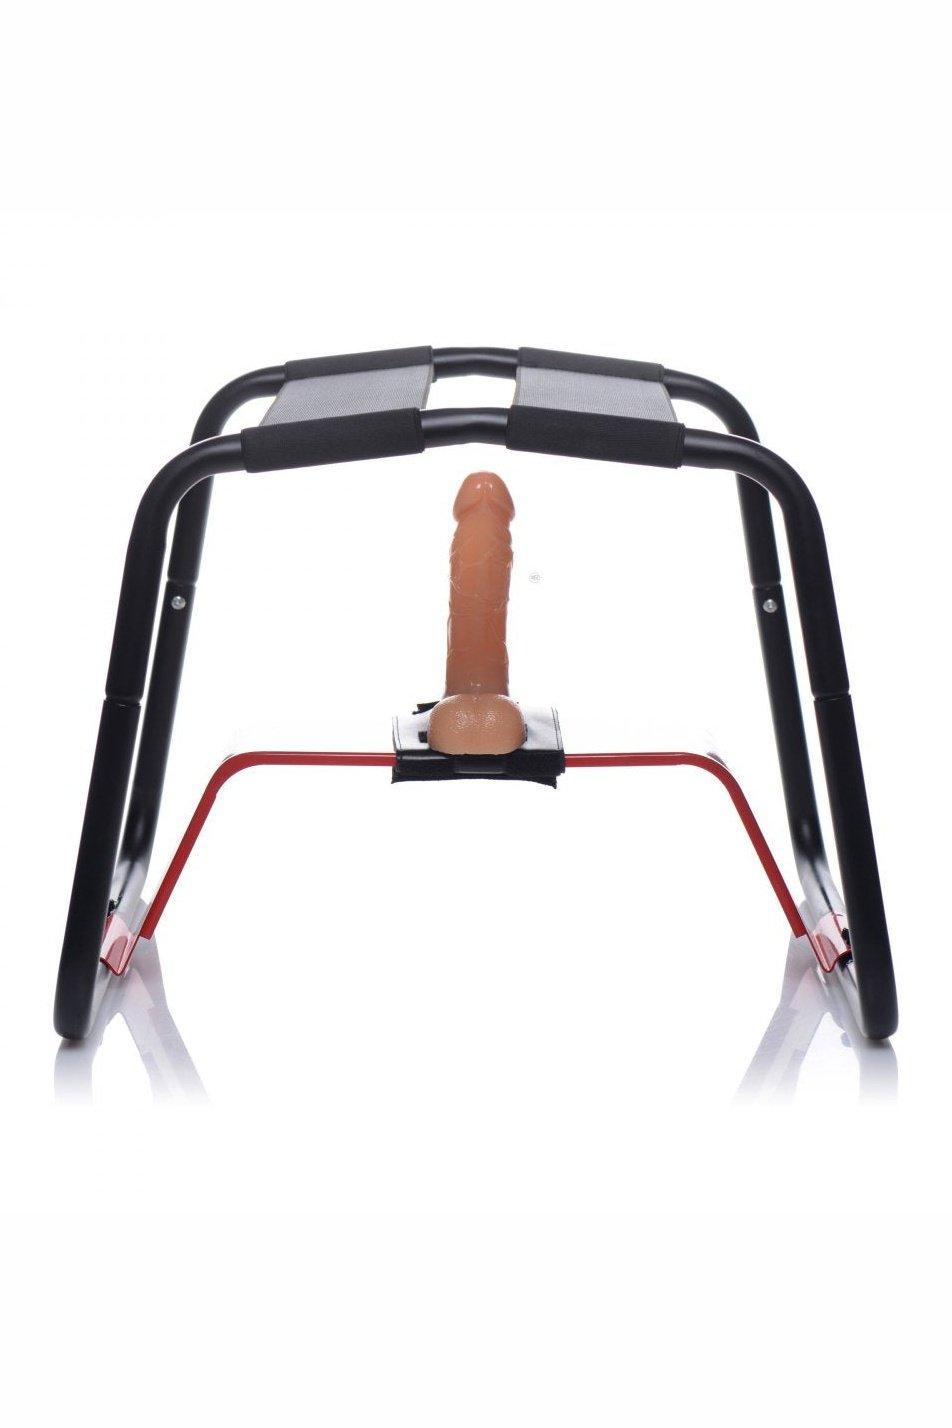 Bangin Bench Extreme Sex Stool - Sex On the Go